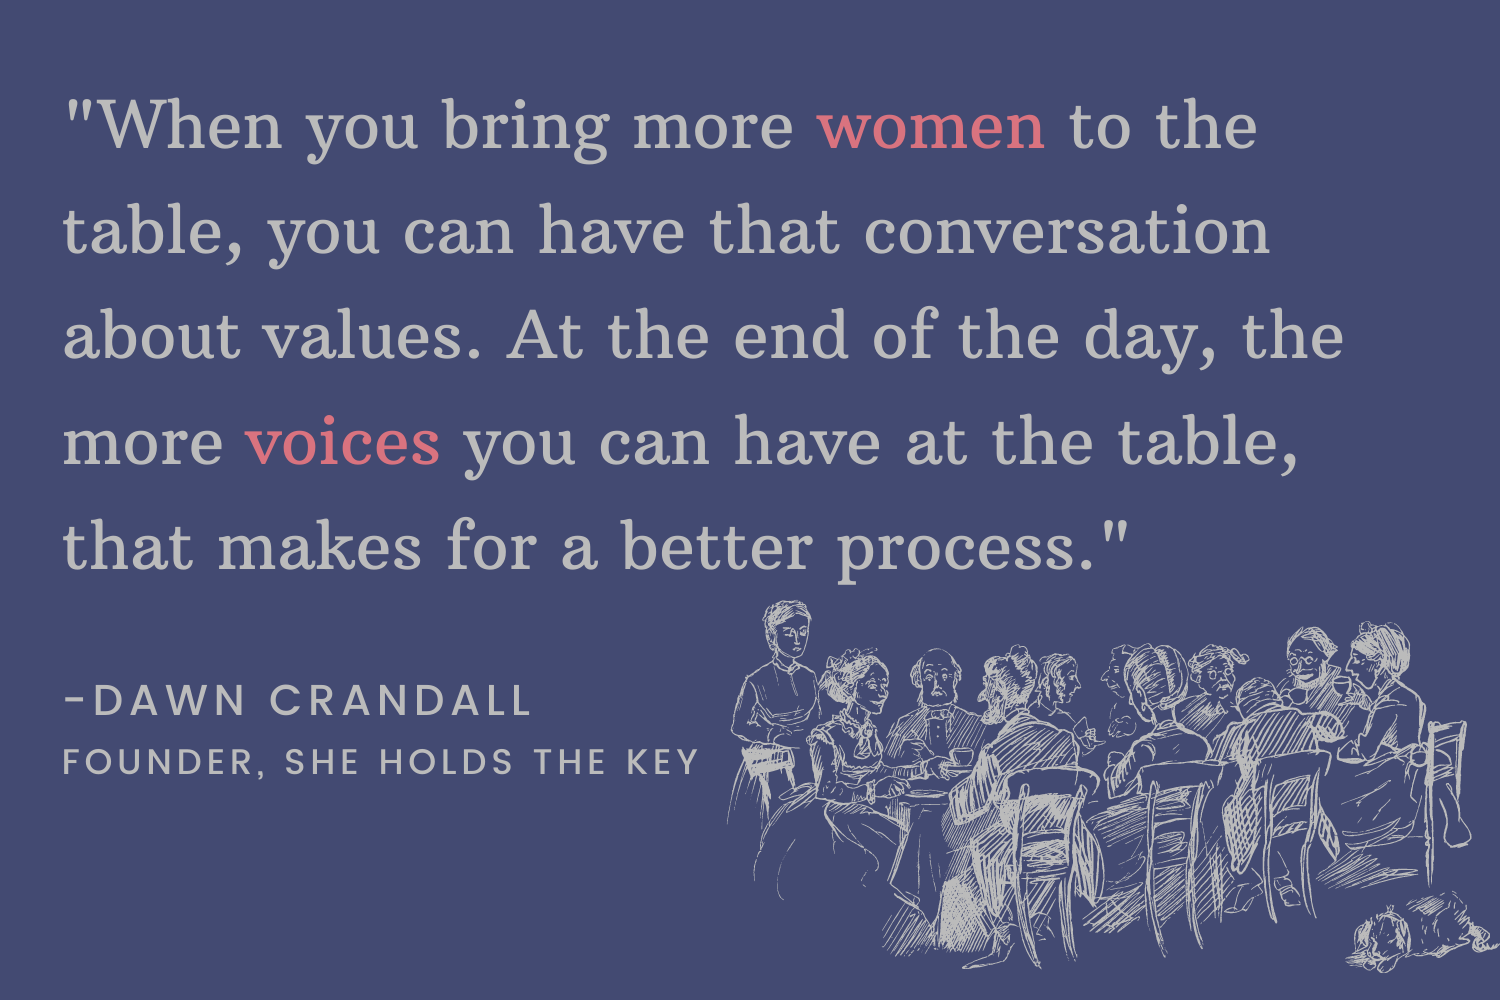 Women Hold the Key in Michigan: A Conversation with Dawn Crandall